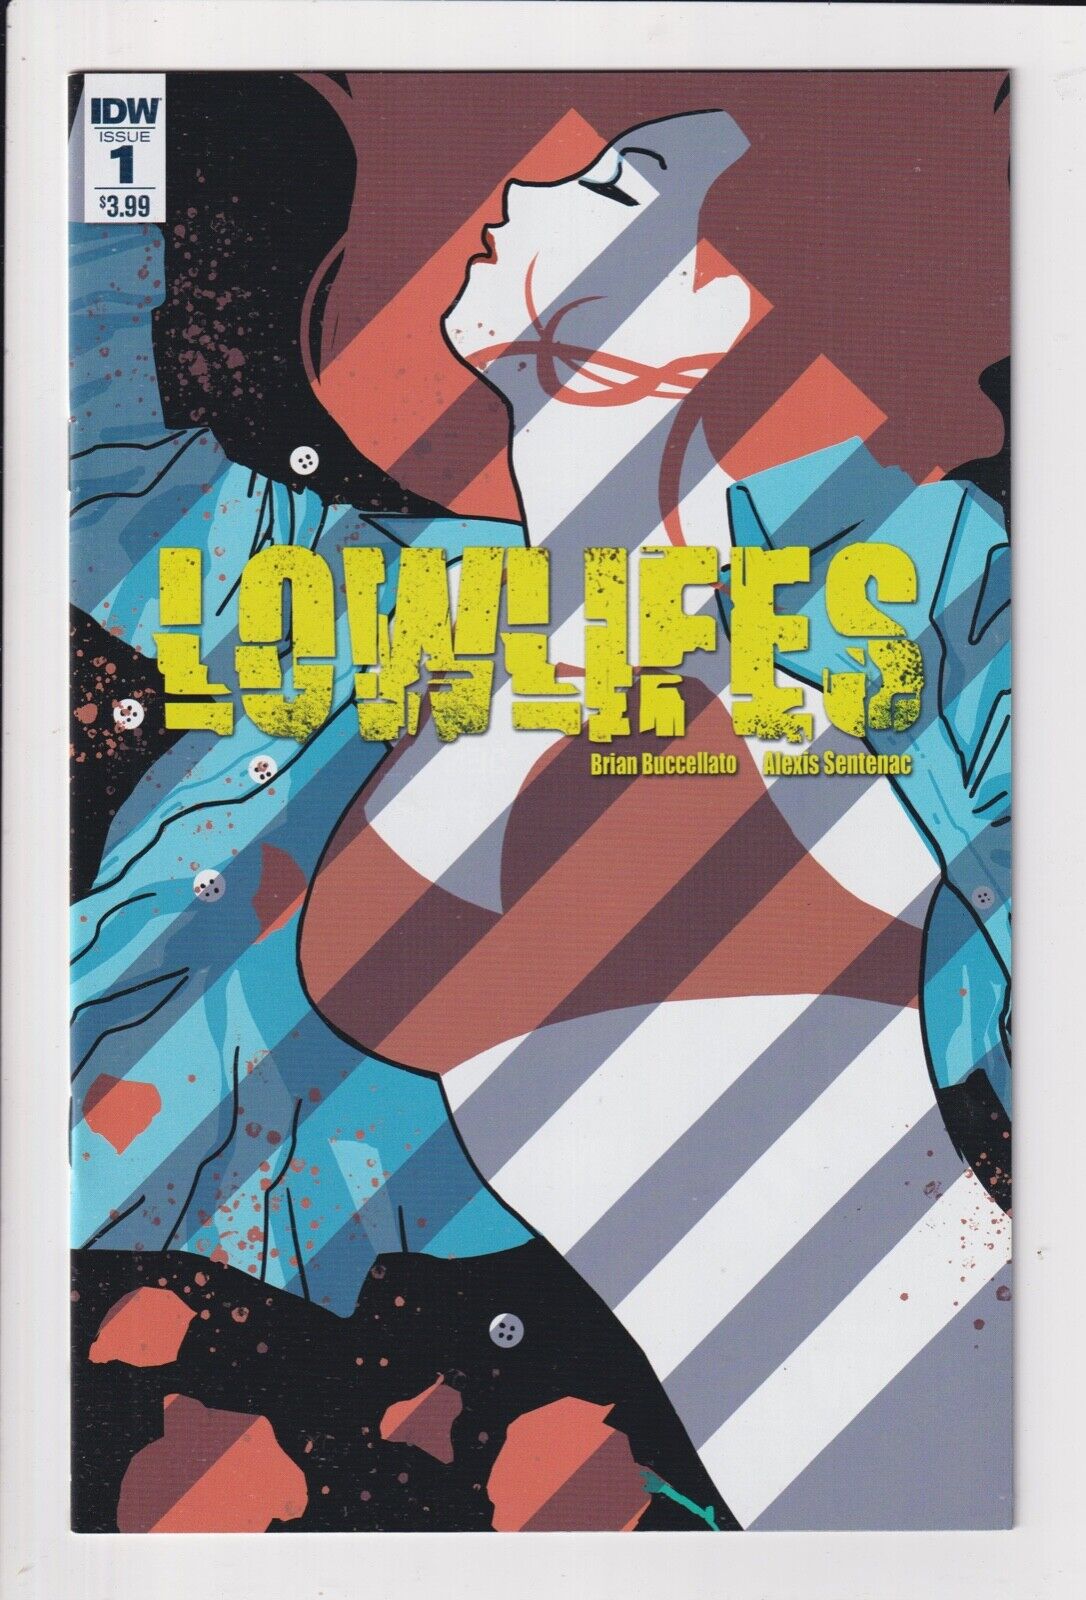 CLEARANCE BIN: LOWLIFES 1-4 VG Buccellato IDW comics sold SEPARATELY you PICK